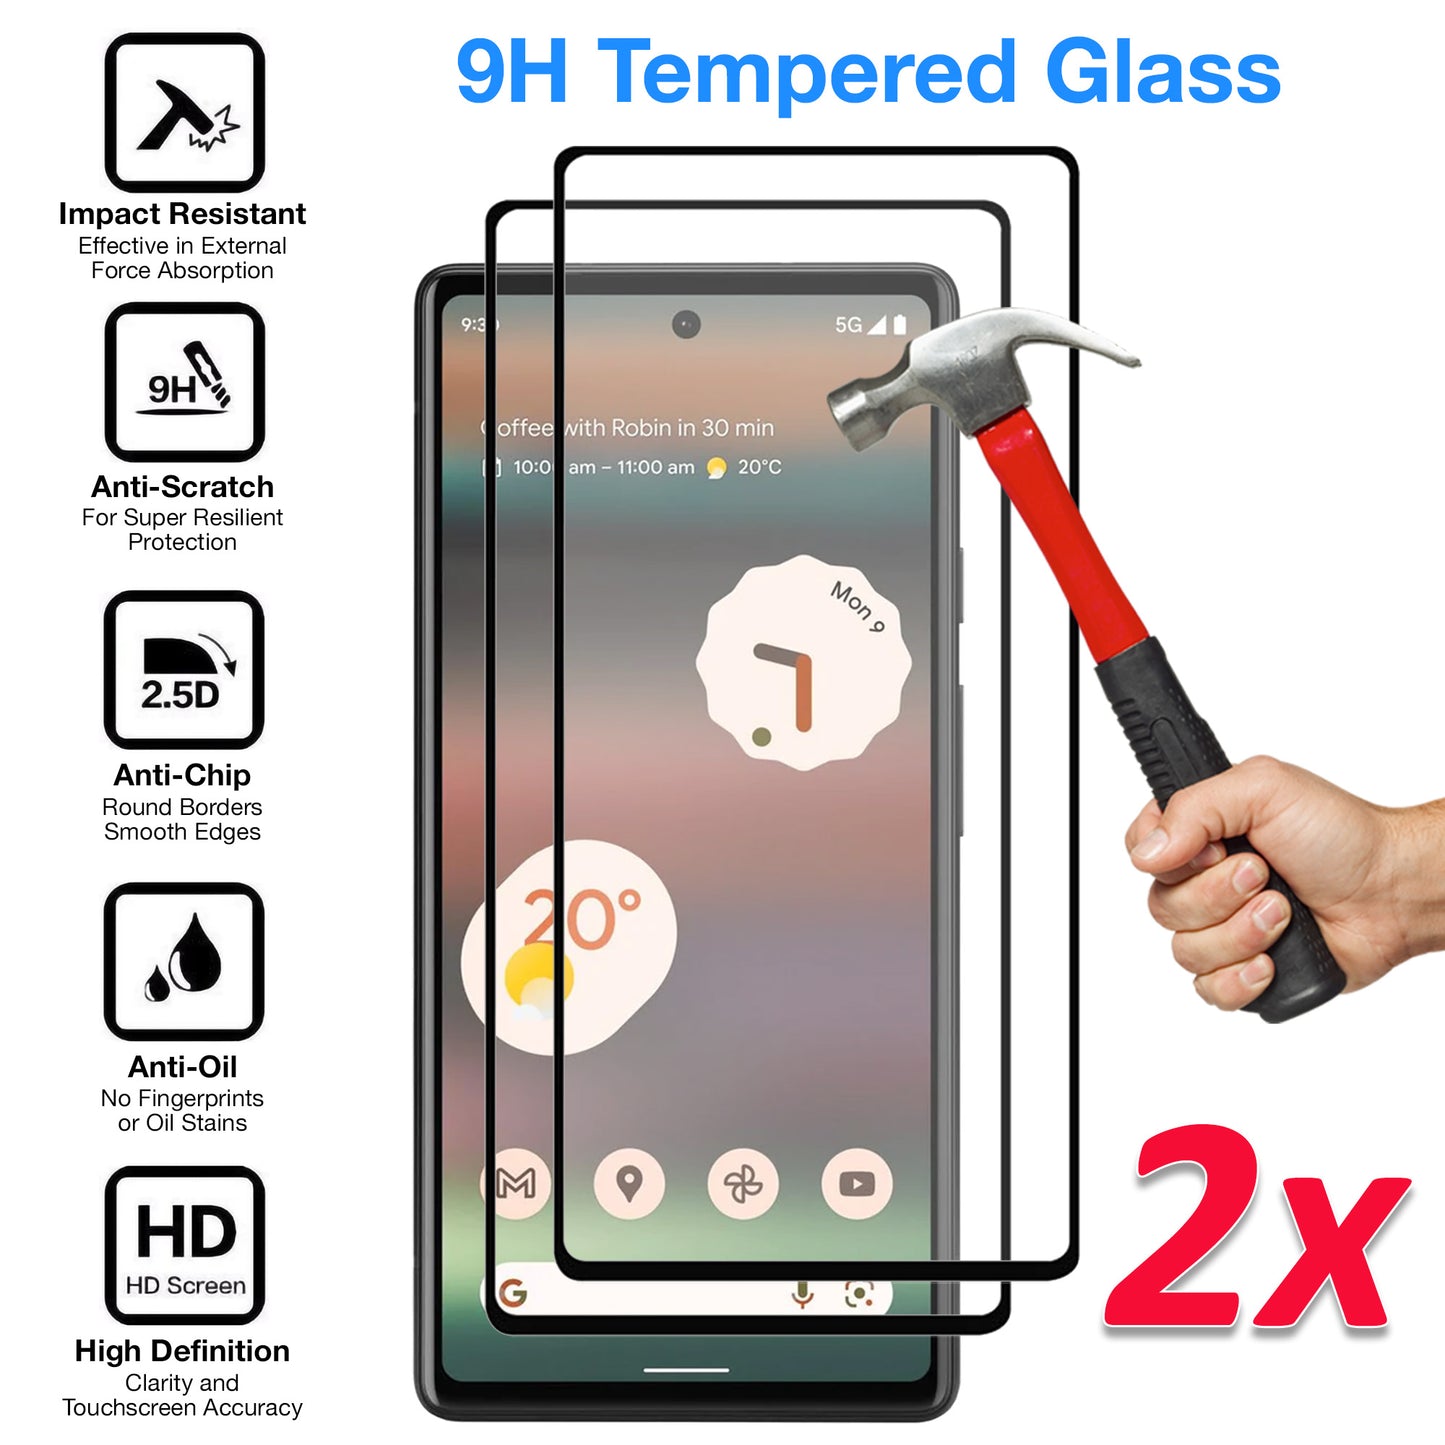 [2 Pack] MEZON Google Pixel 6a (6.1") Tempered Glass Full Coverage Crystal Clear Premium 3D Edge 9H HD Screen Protector